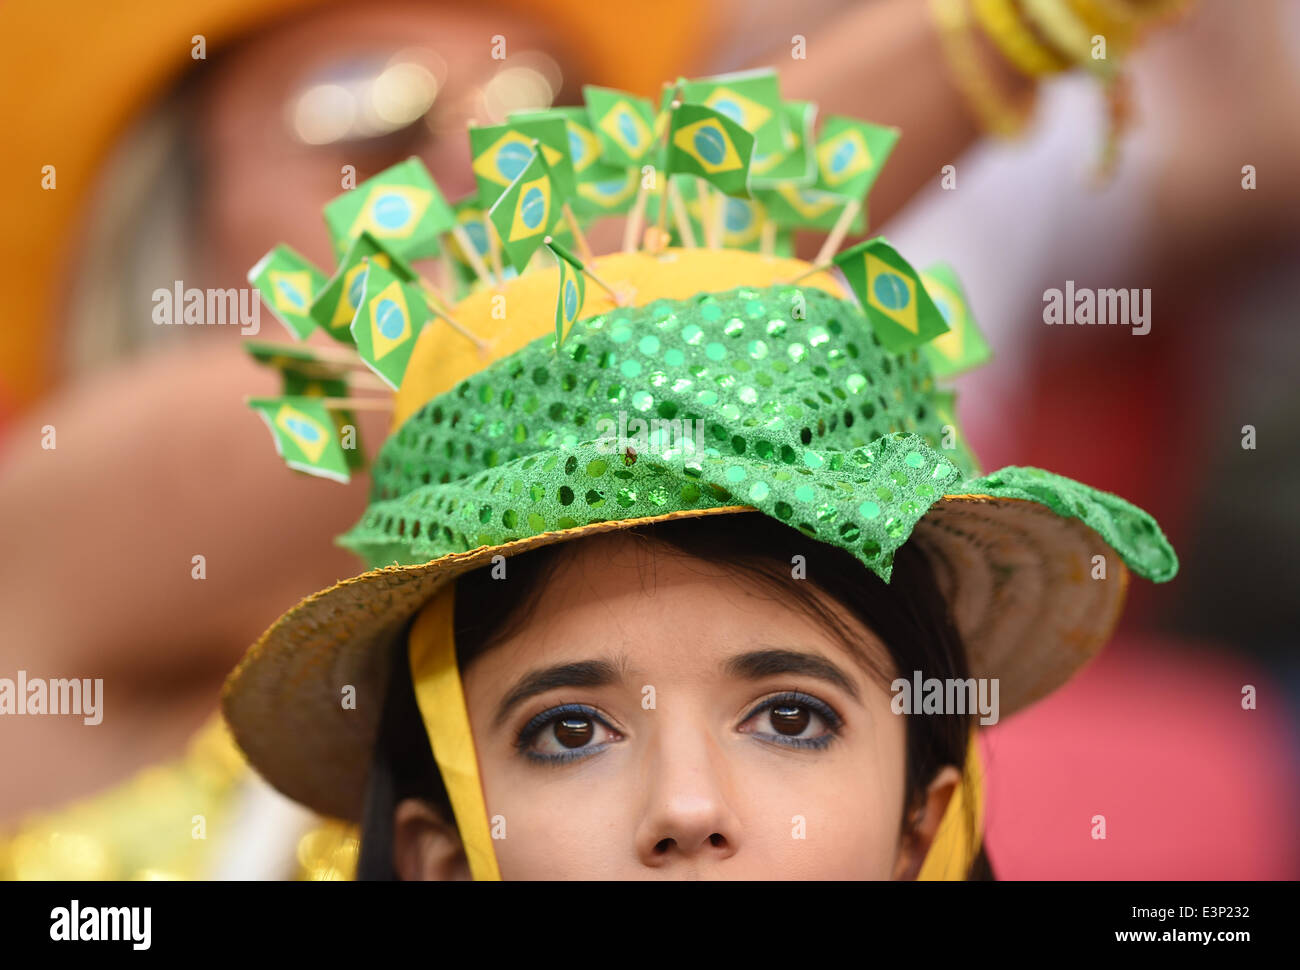 Brasilia, Brazil. 26th June, 2014. A supporter of Brazil is seen prior to the FIFA World Cup 2014 group G preliminary round match between Portugal and Ghana at the Estadio National Stadium in Brasilia, Brazil, on 26 June 2014 Credit: © dpa picture alliance/Alamy Live News  Stock Photo